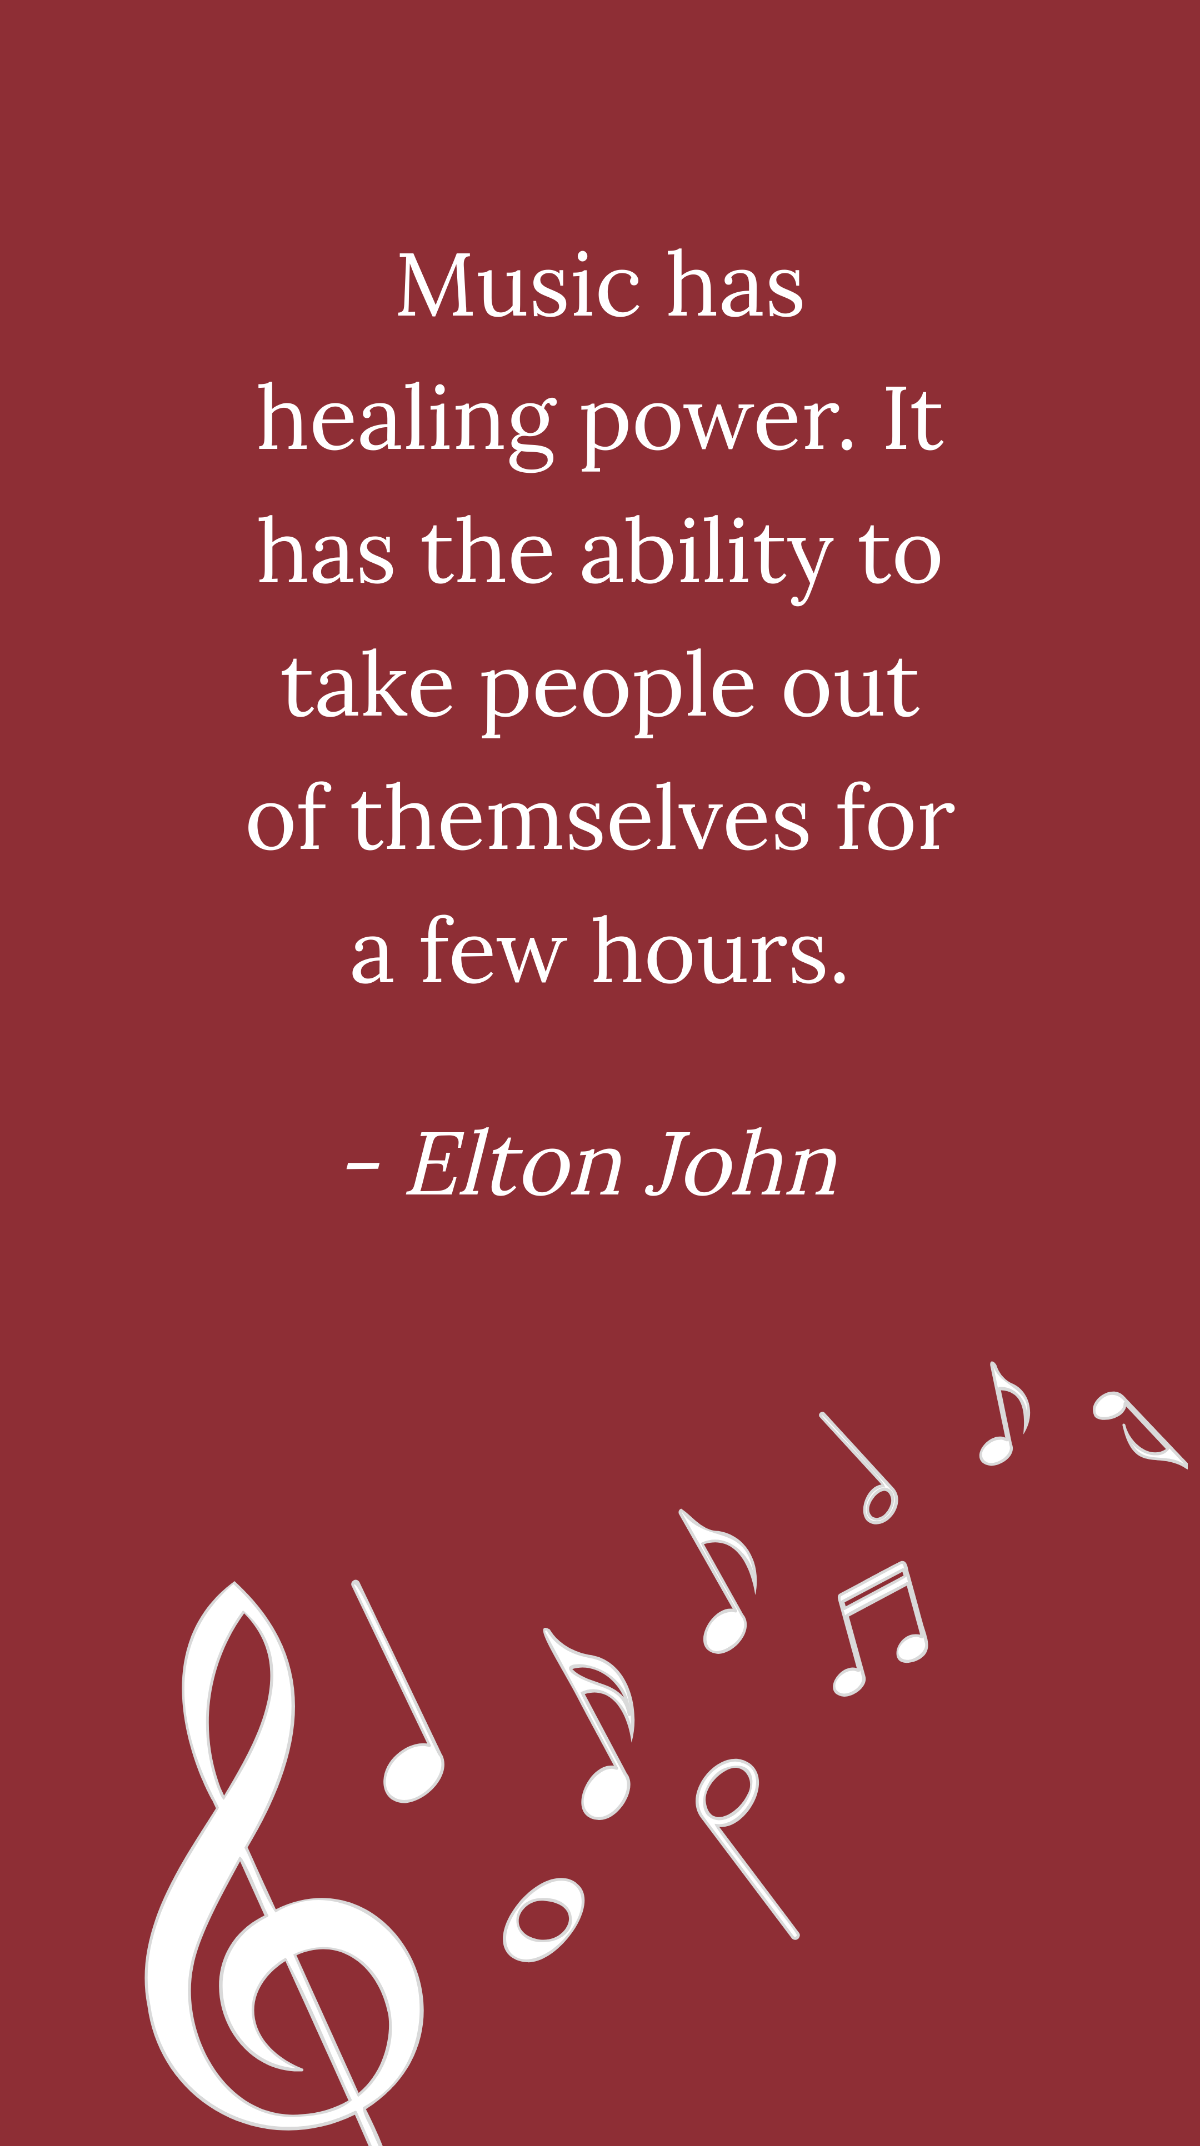 Elton John - Music has healing power. It has the ability to take people out of themselves for a few hours.